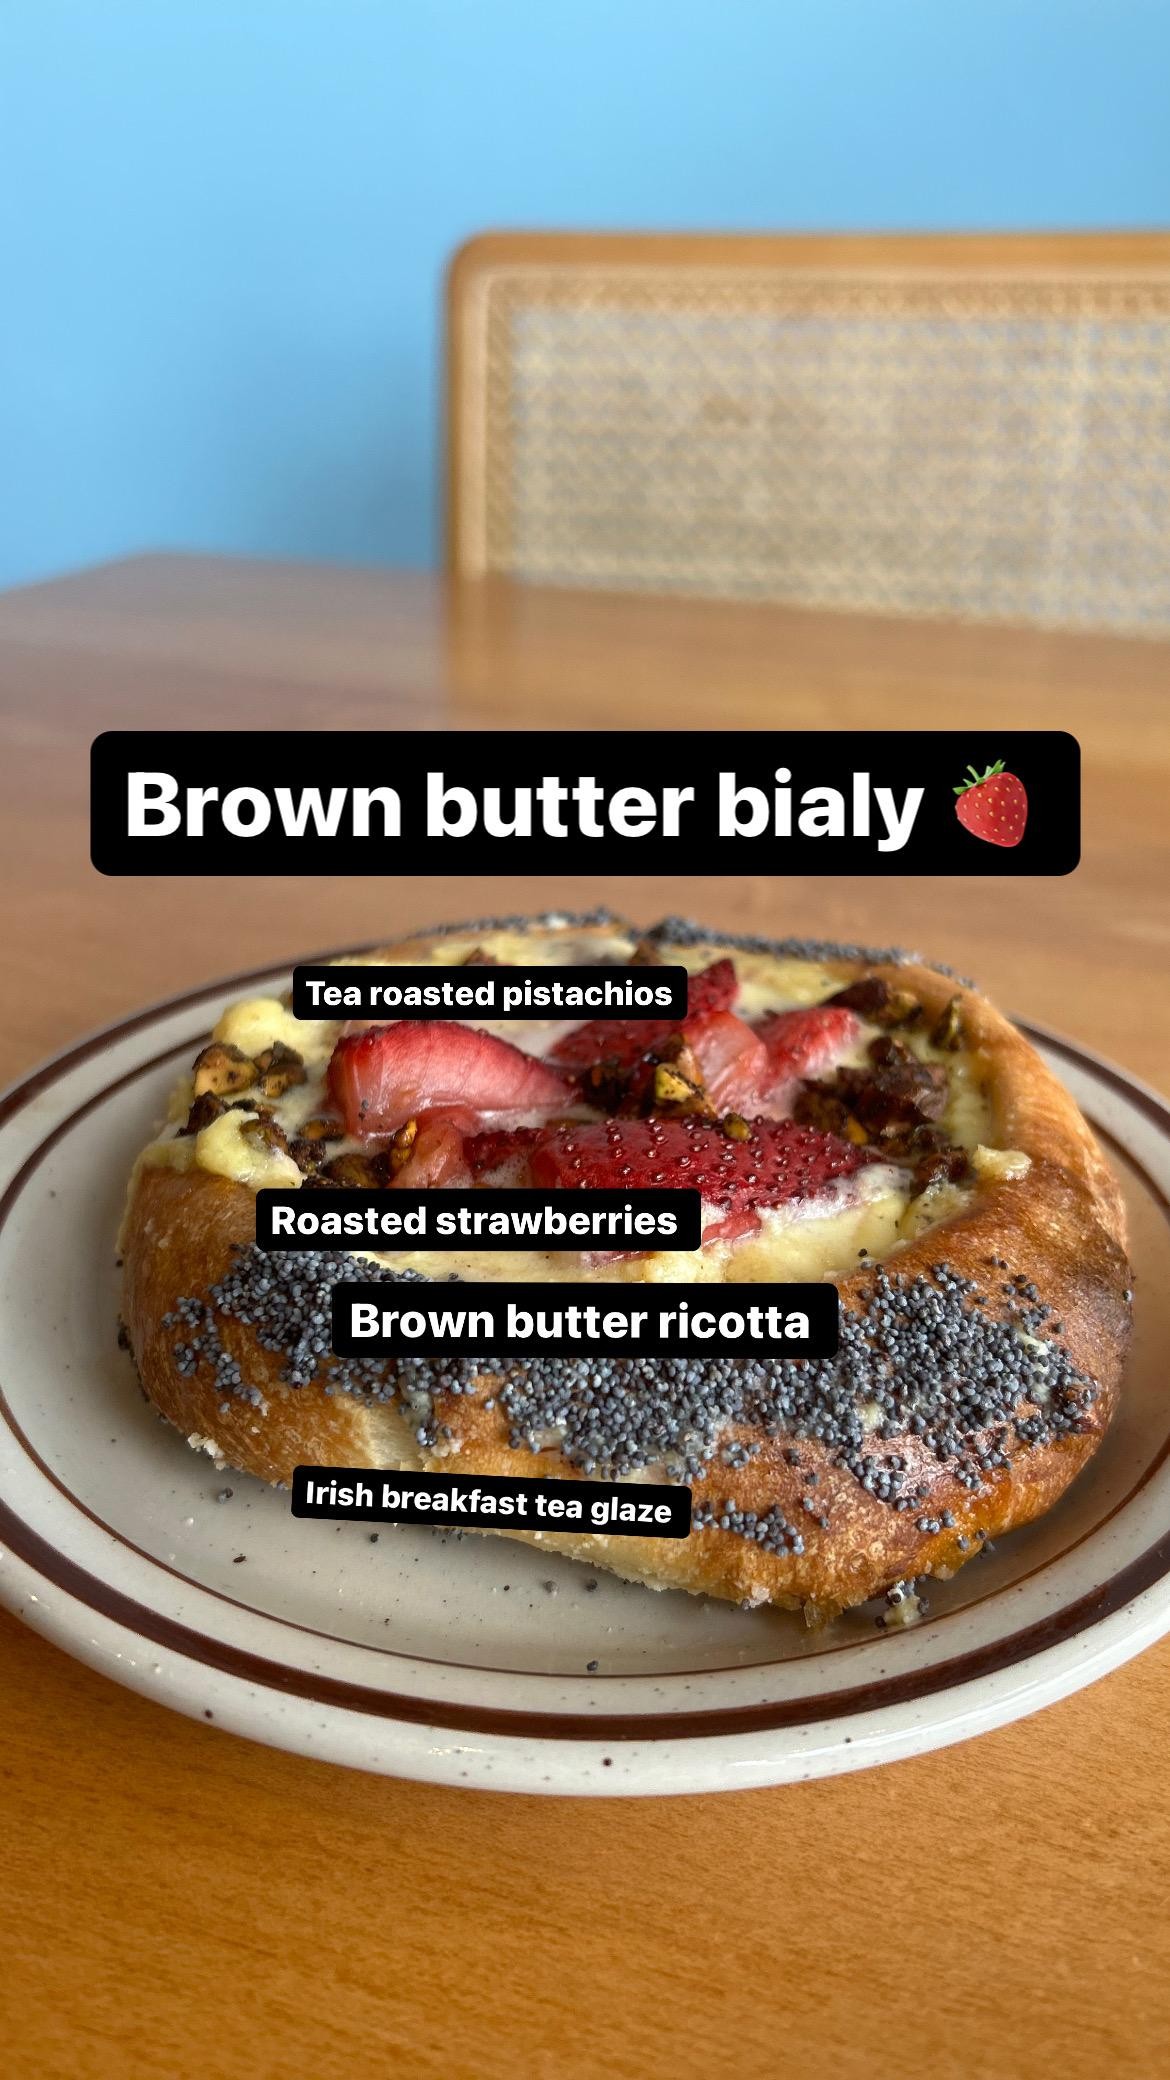 Brown butter bialy